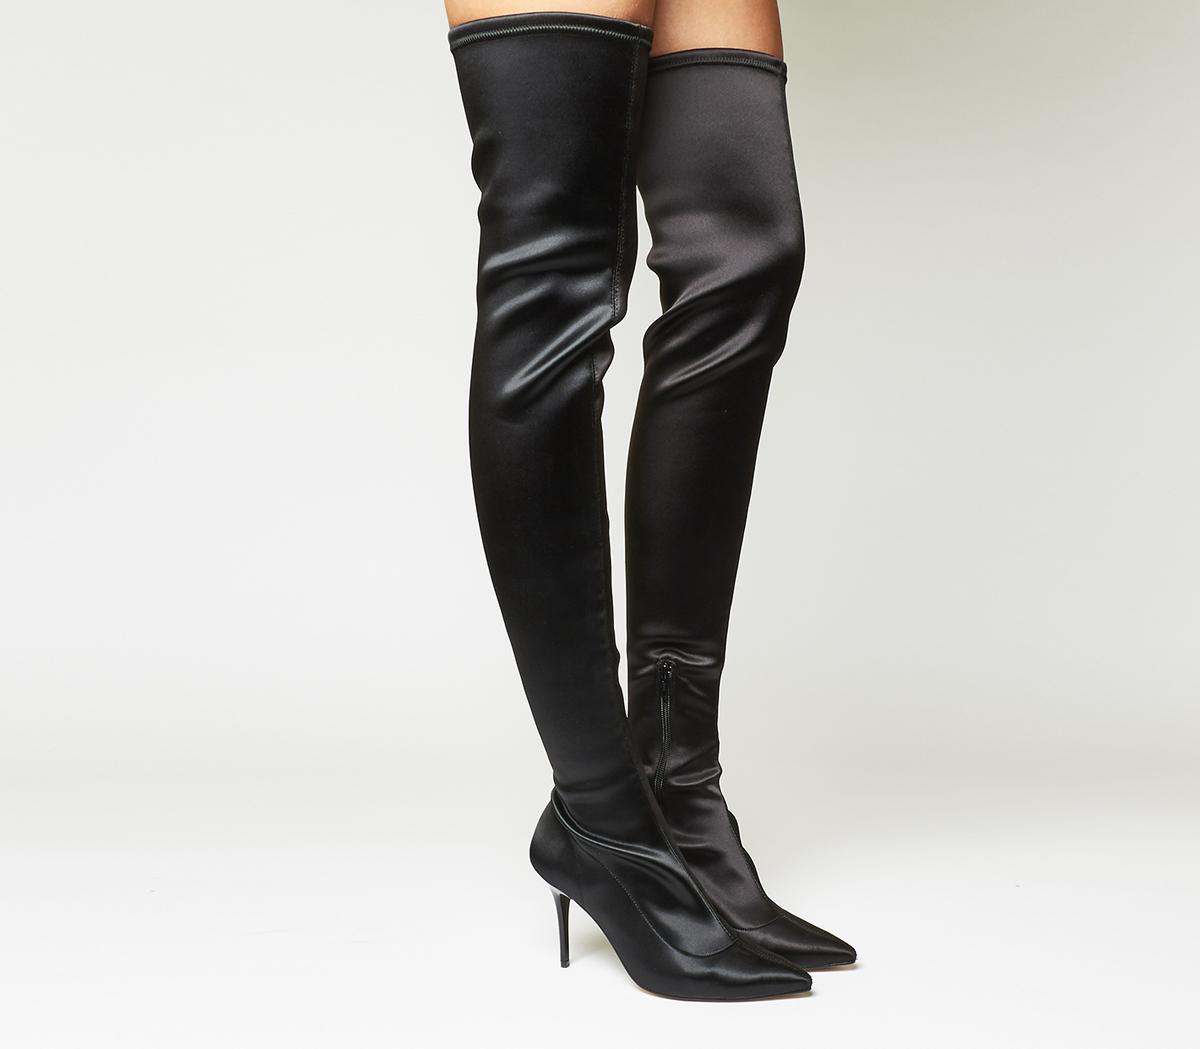 Office Kiss And Tell Stretch Over The Knee Boots Black Satin Stretch Knee High Boots